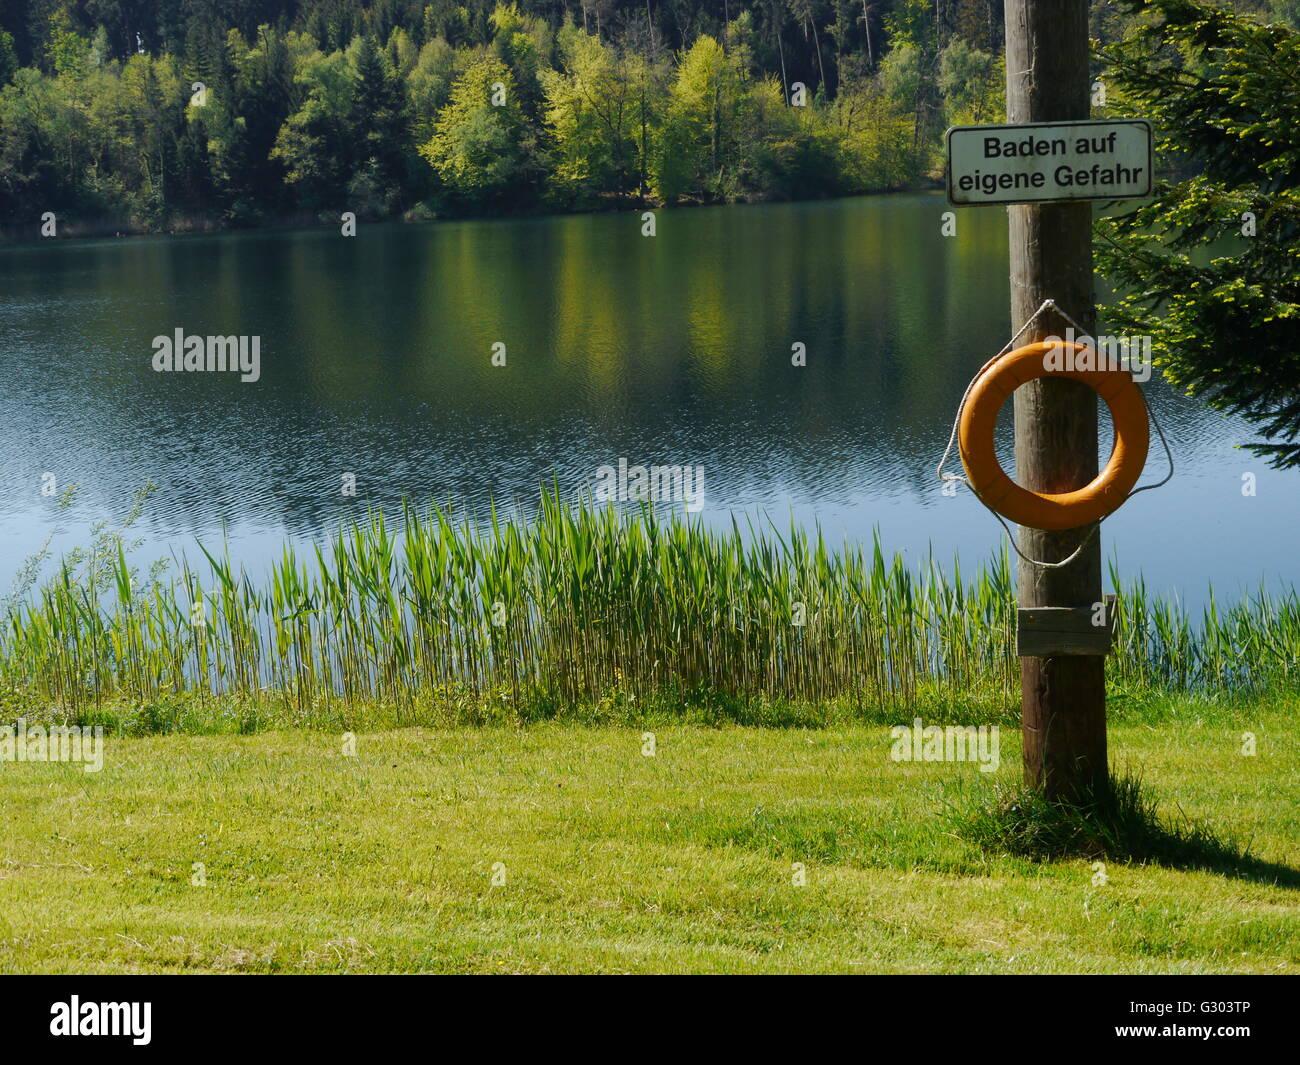 Lifebuoy and sign 'Baden auf eigene Gefahr', German for 'swimming at your own risk', Degersee lake, Baden-Wuerttemberg Stock Photo